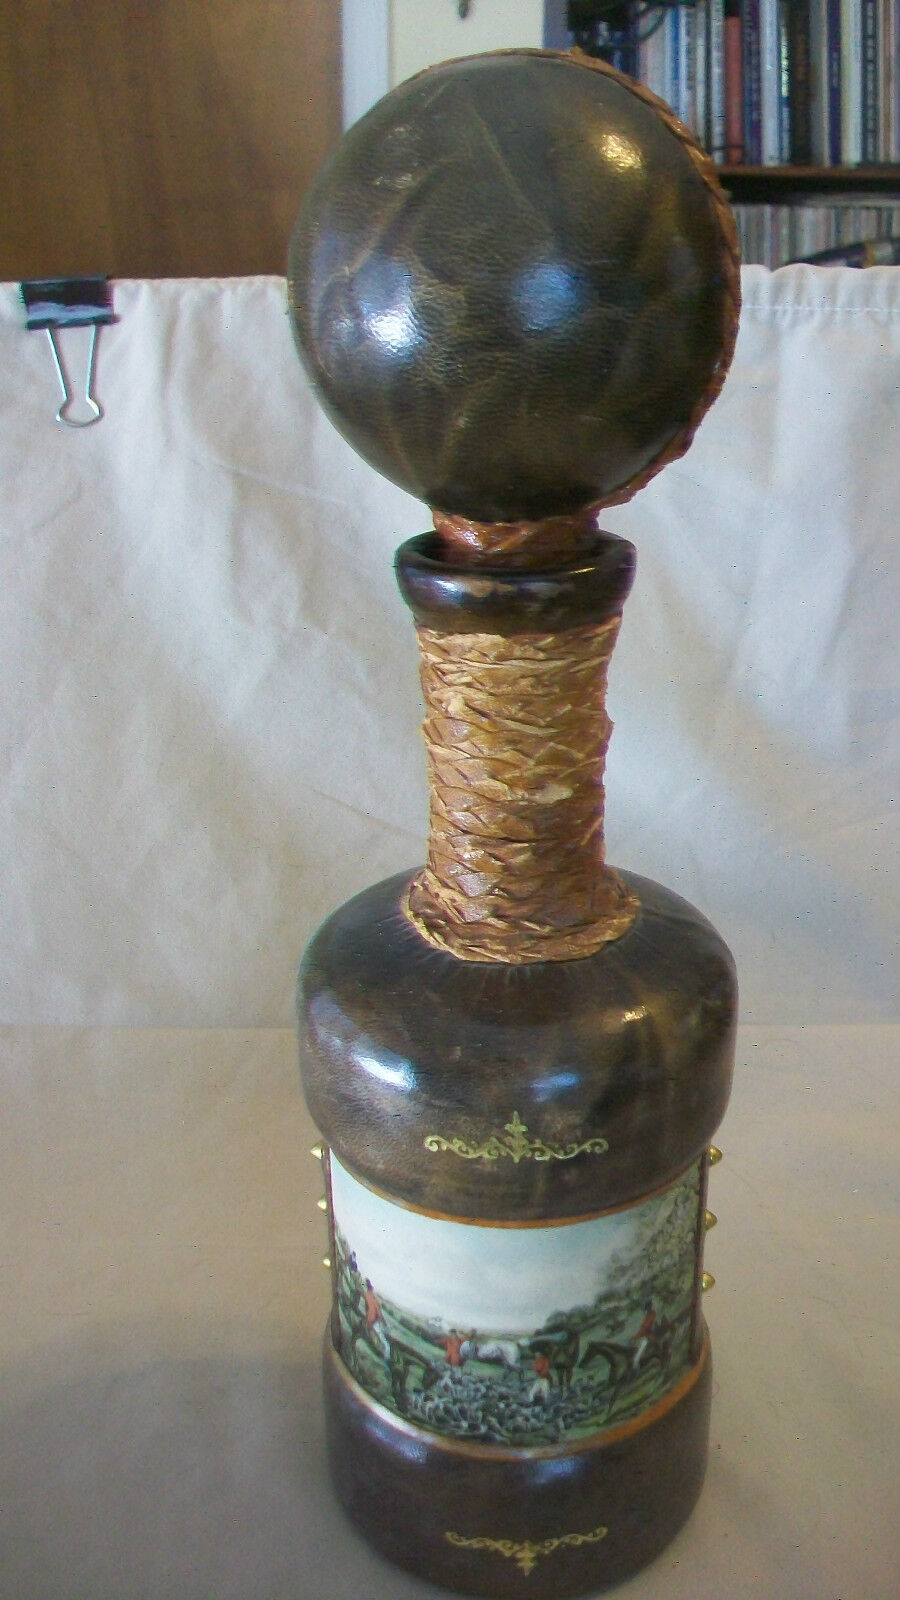 VINTAGE EMPTY LEATHER WRAPPED BOTTLE OR DECANTER FROM ITALY, WITH FOX HUNT SCENE